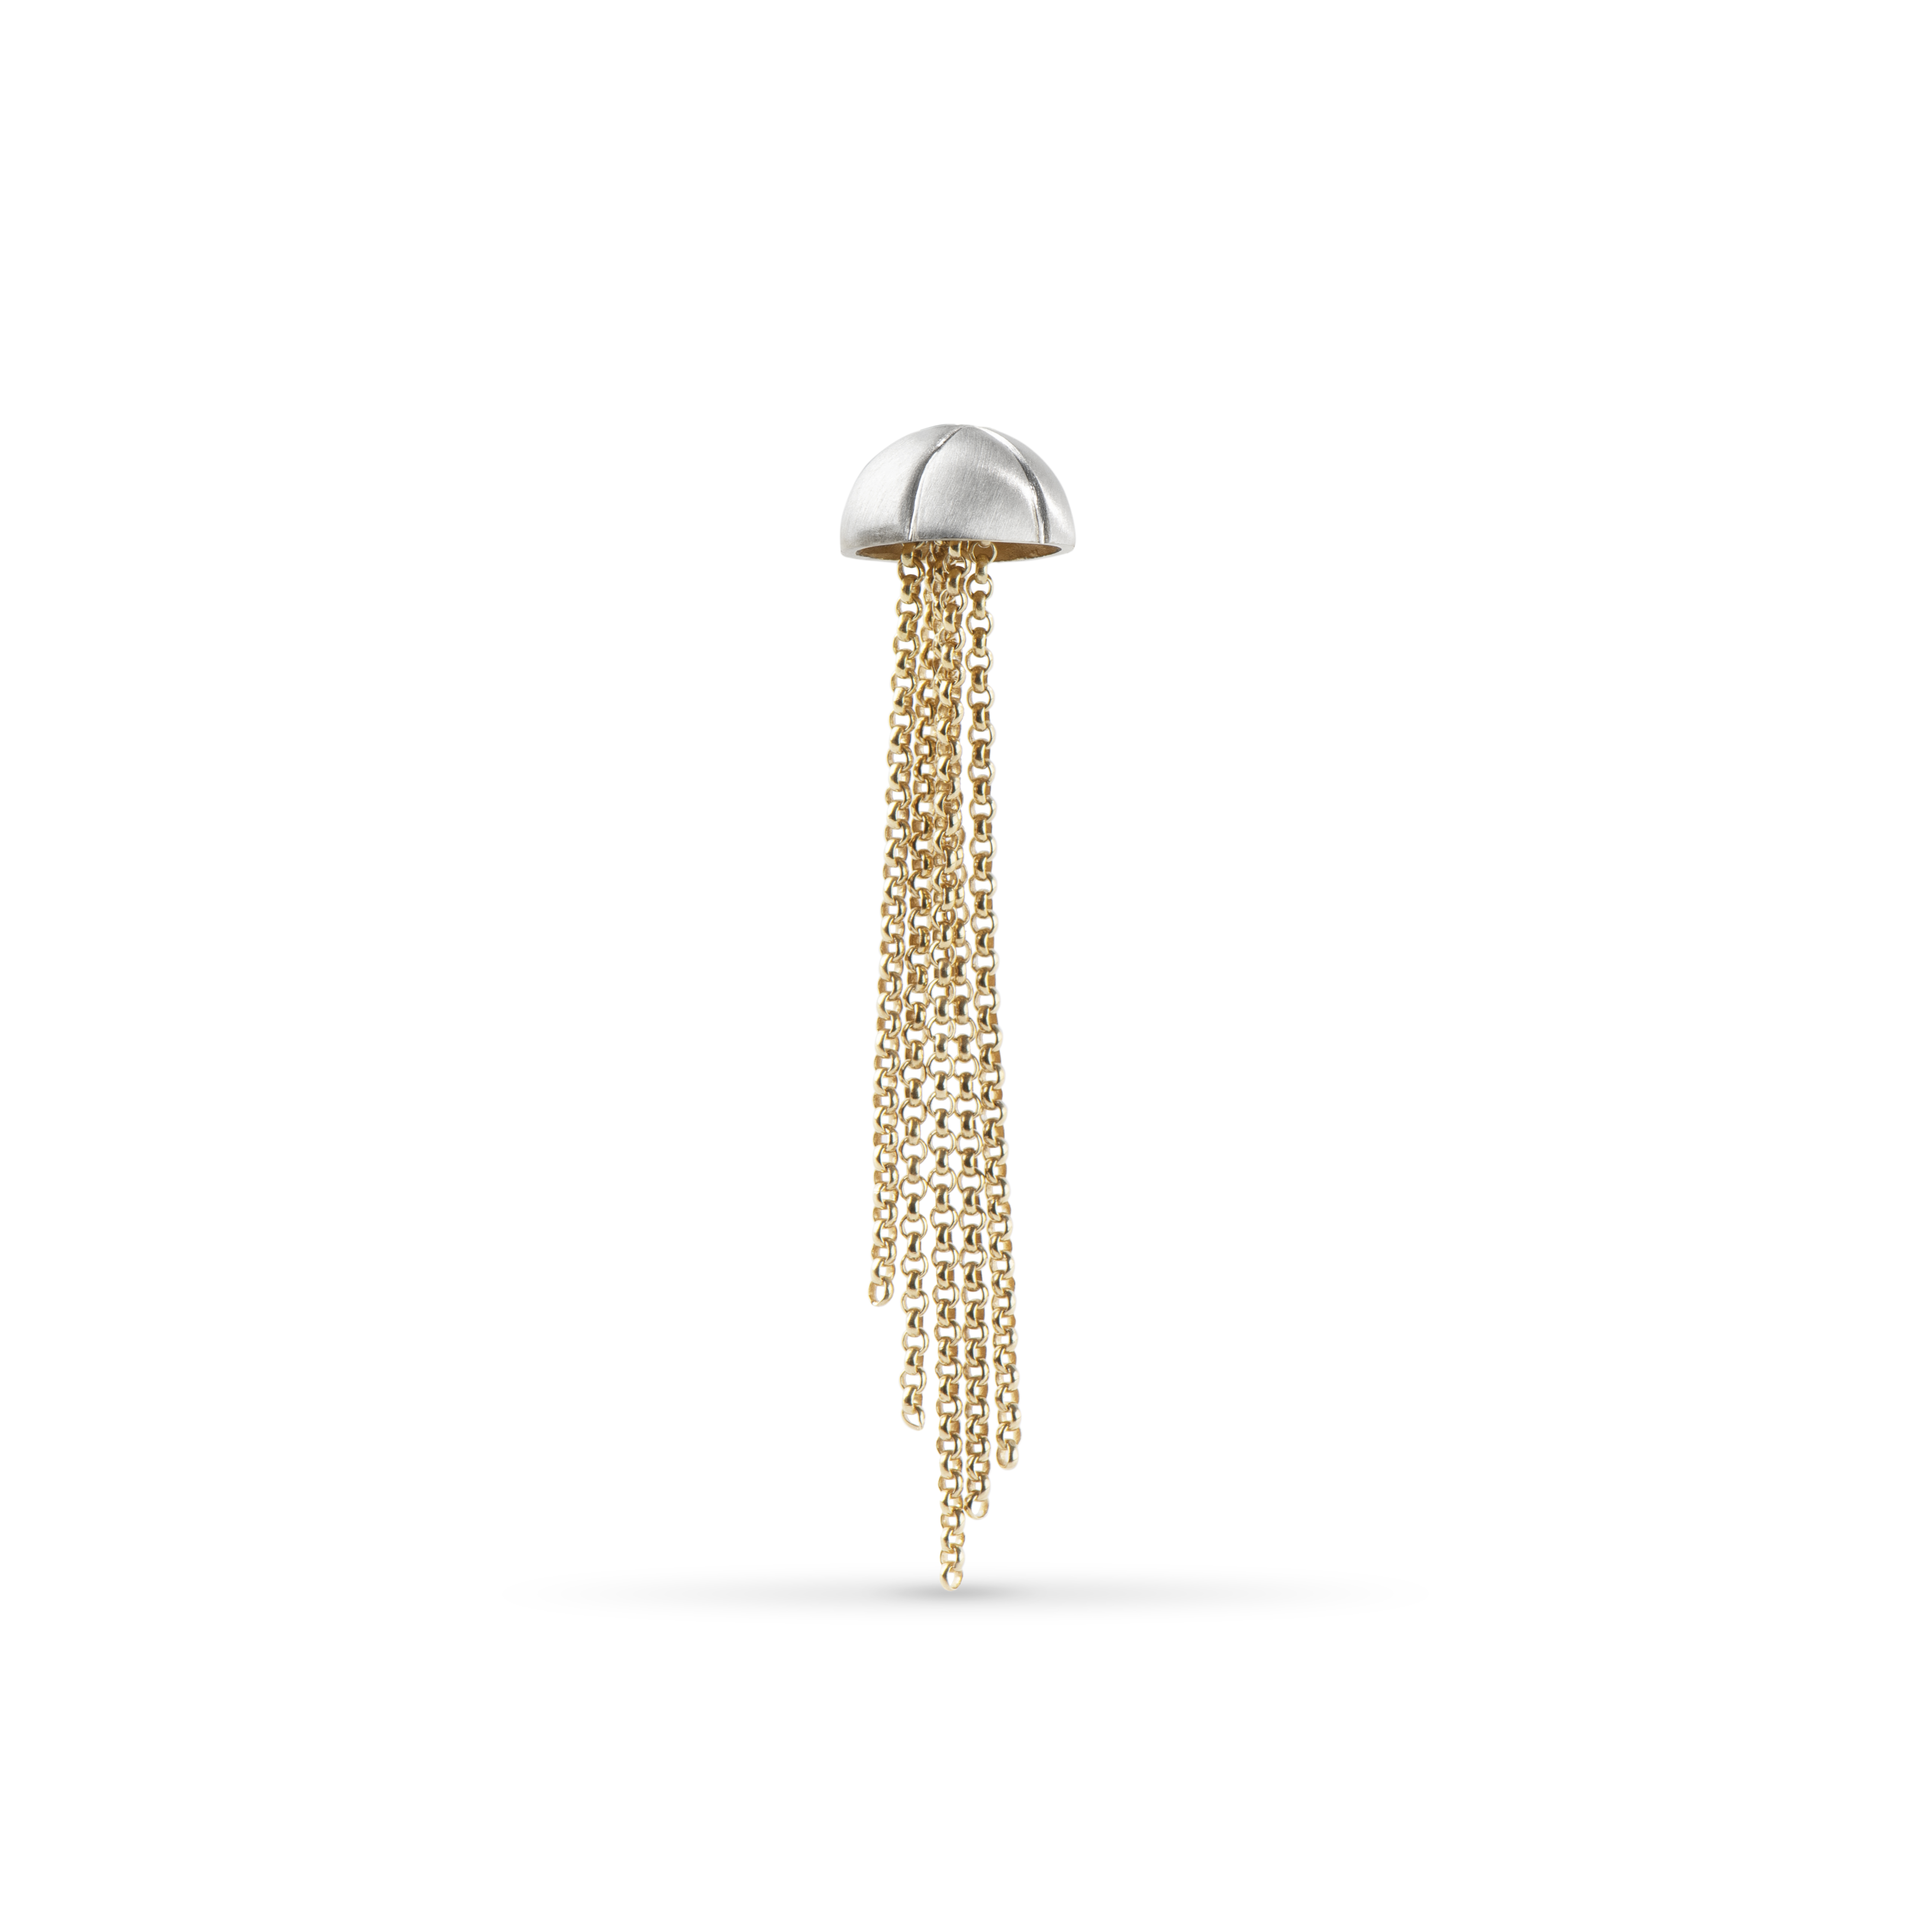 Jellyfish Earring - Gold and Silver - Image 2